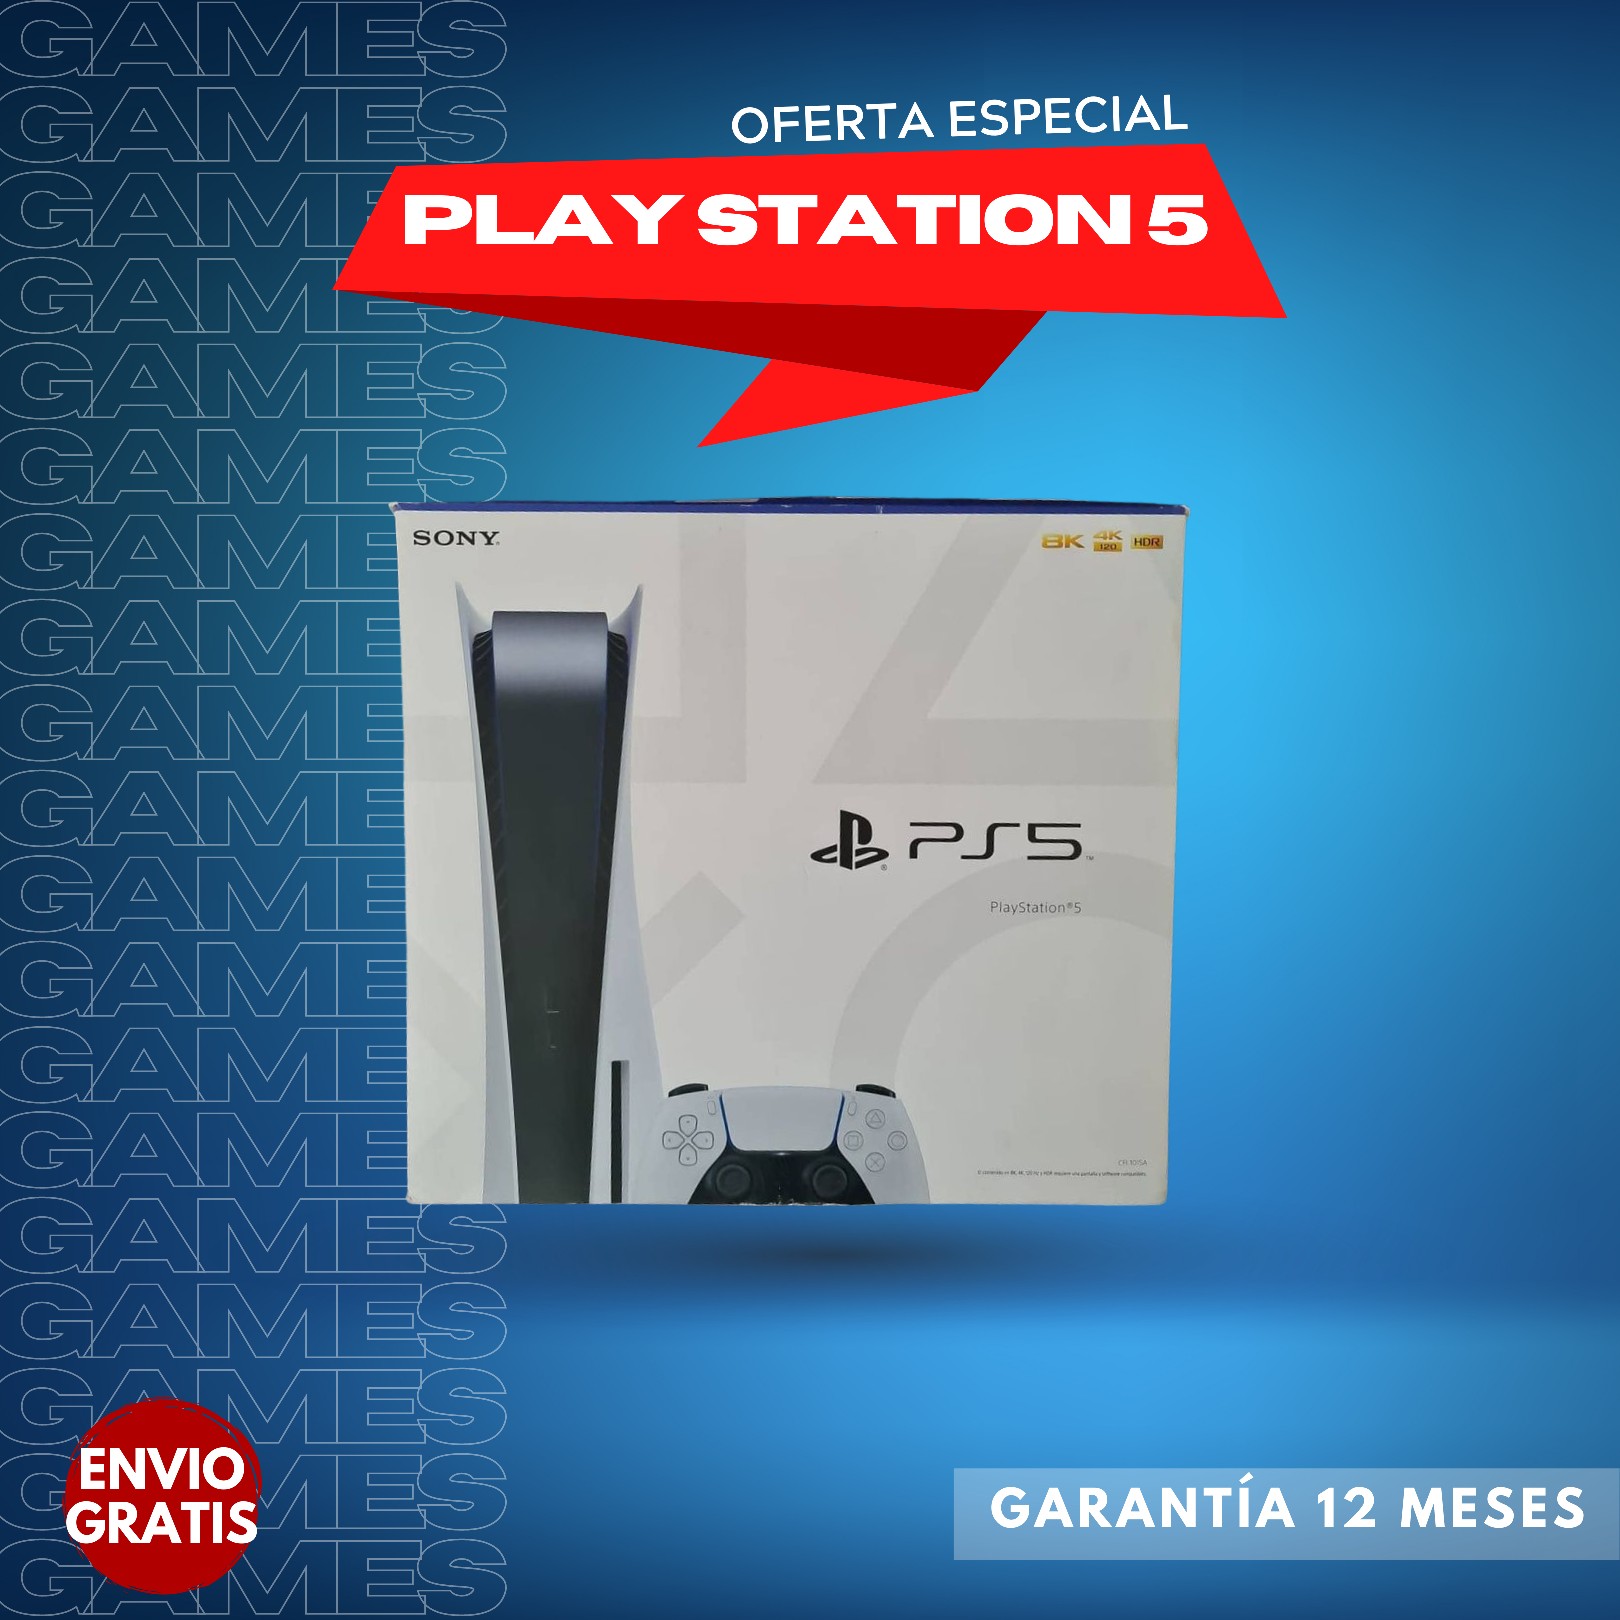 Sony PlayStation 5 (PS5) Version DISCO